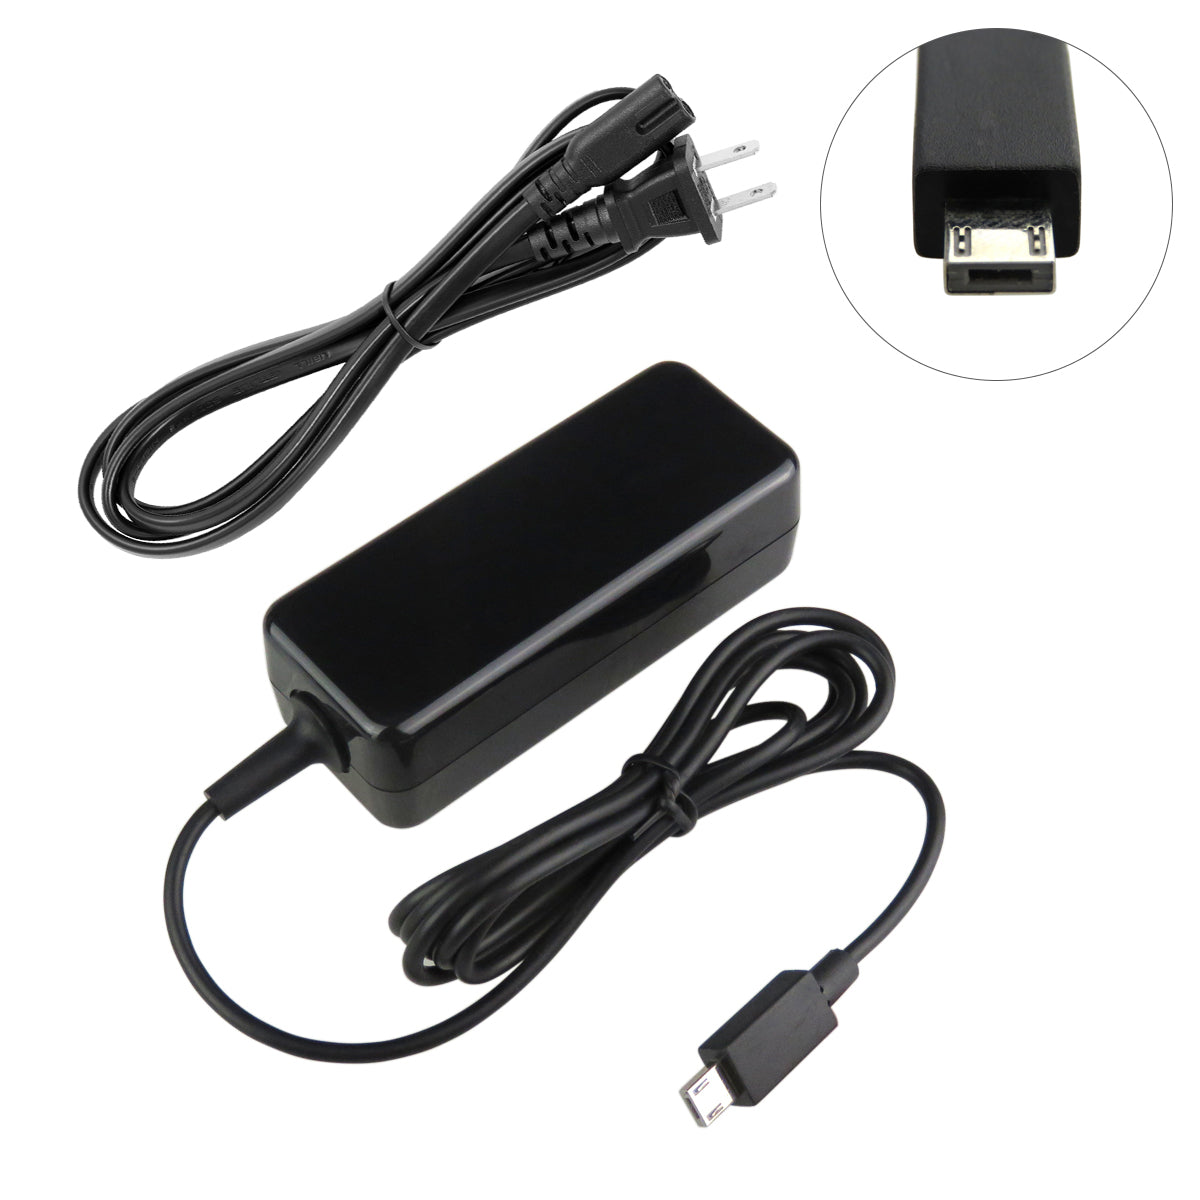 Charger for ASUS EeeBook X205TA Laptop.